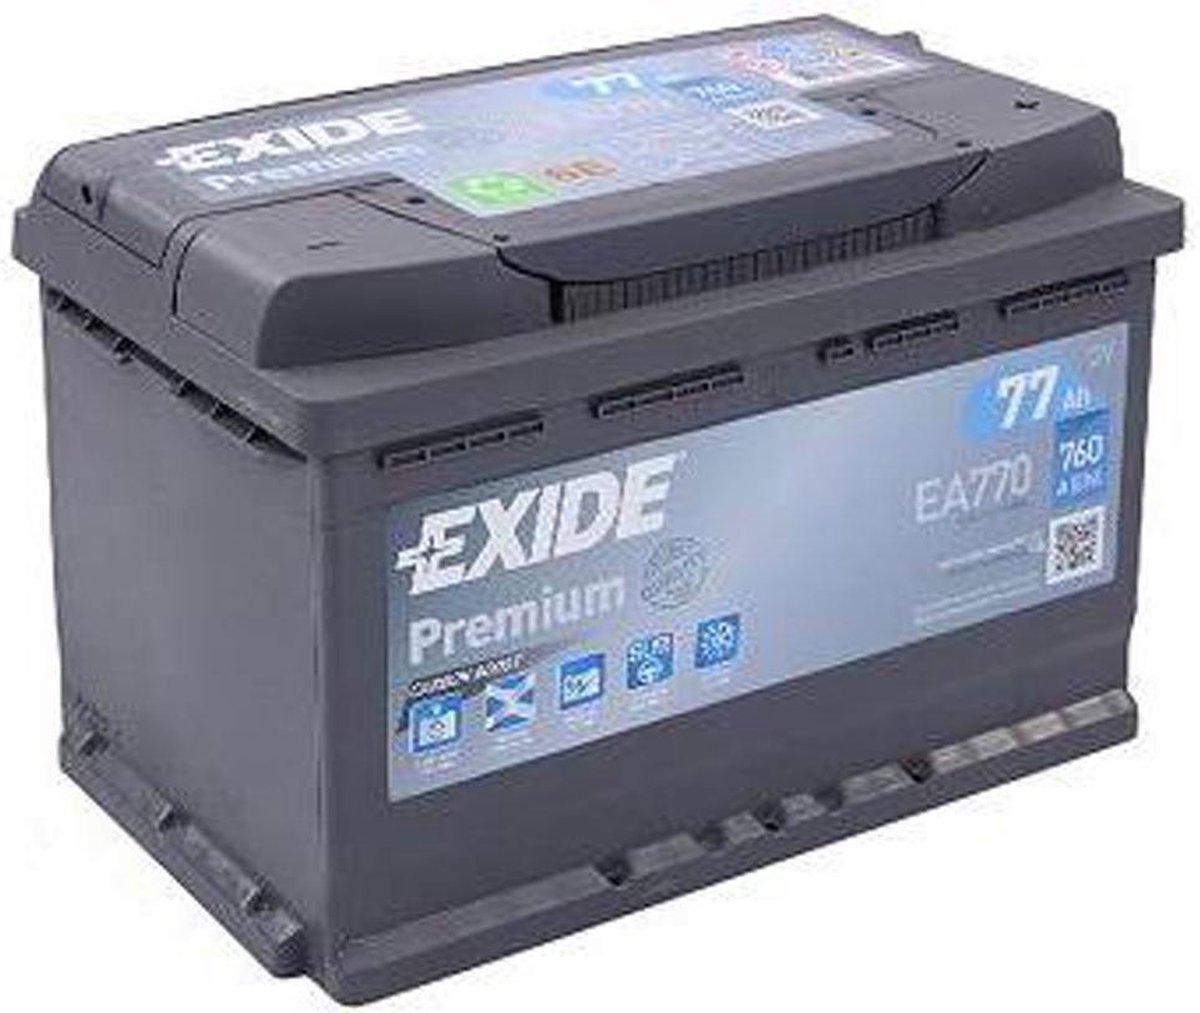 Autobatterie Starterbatterie Exide EB740 EXCELL12V 74Ah 680A 3661024034555